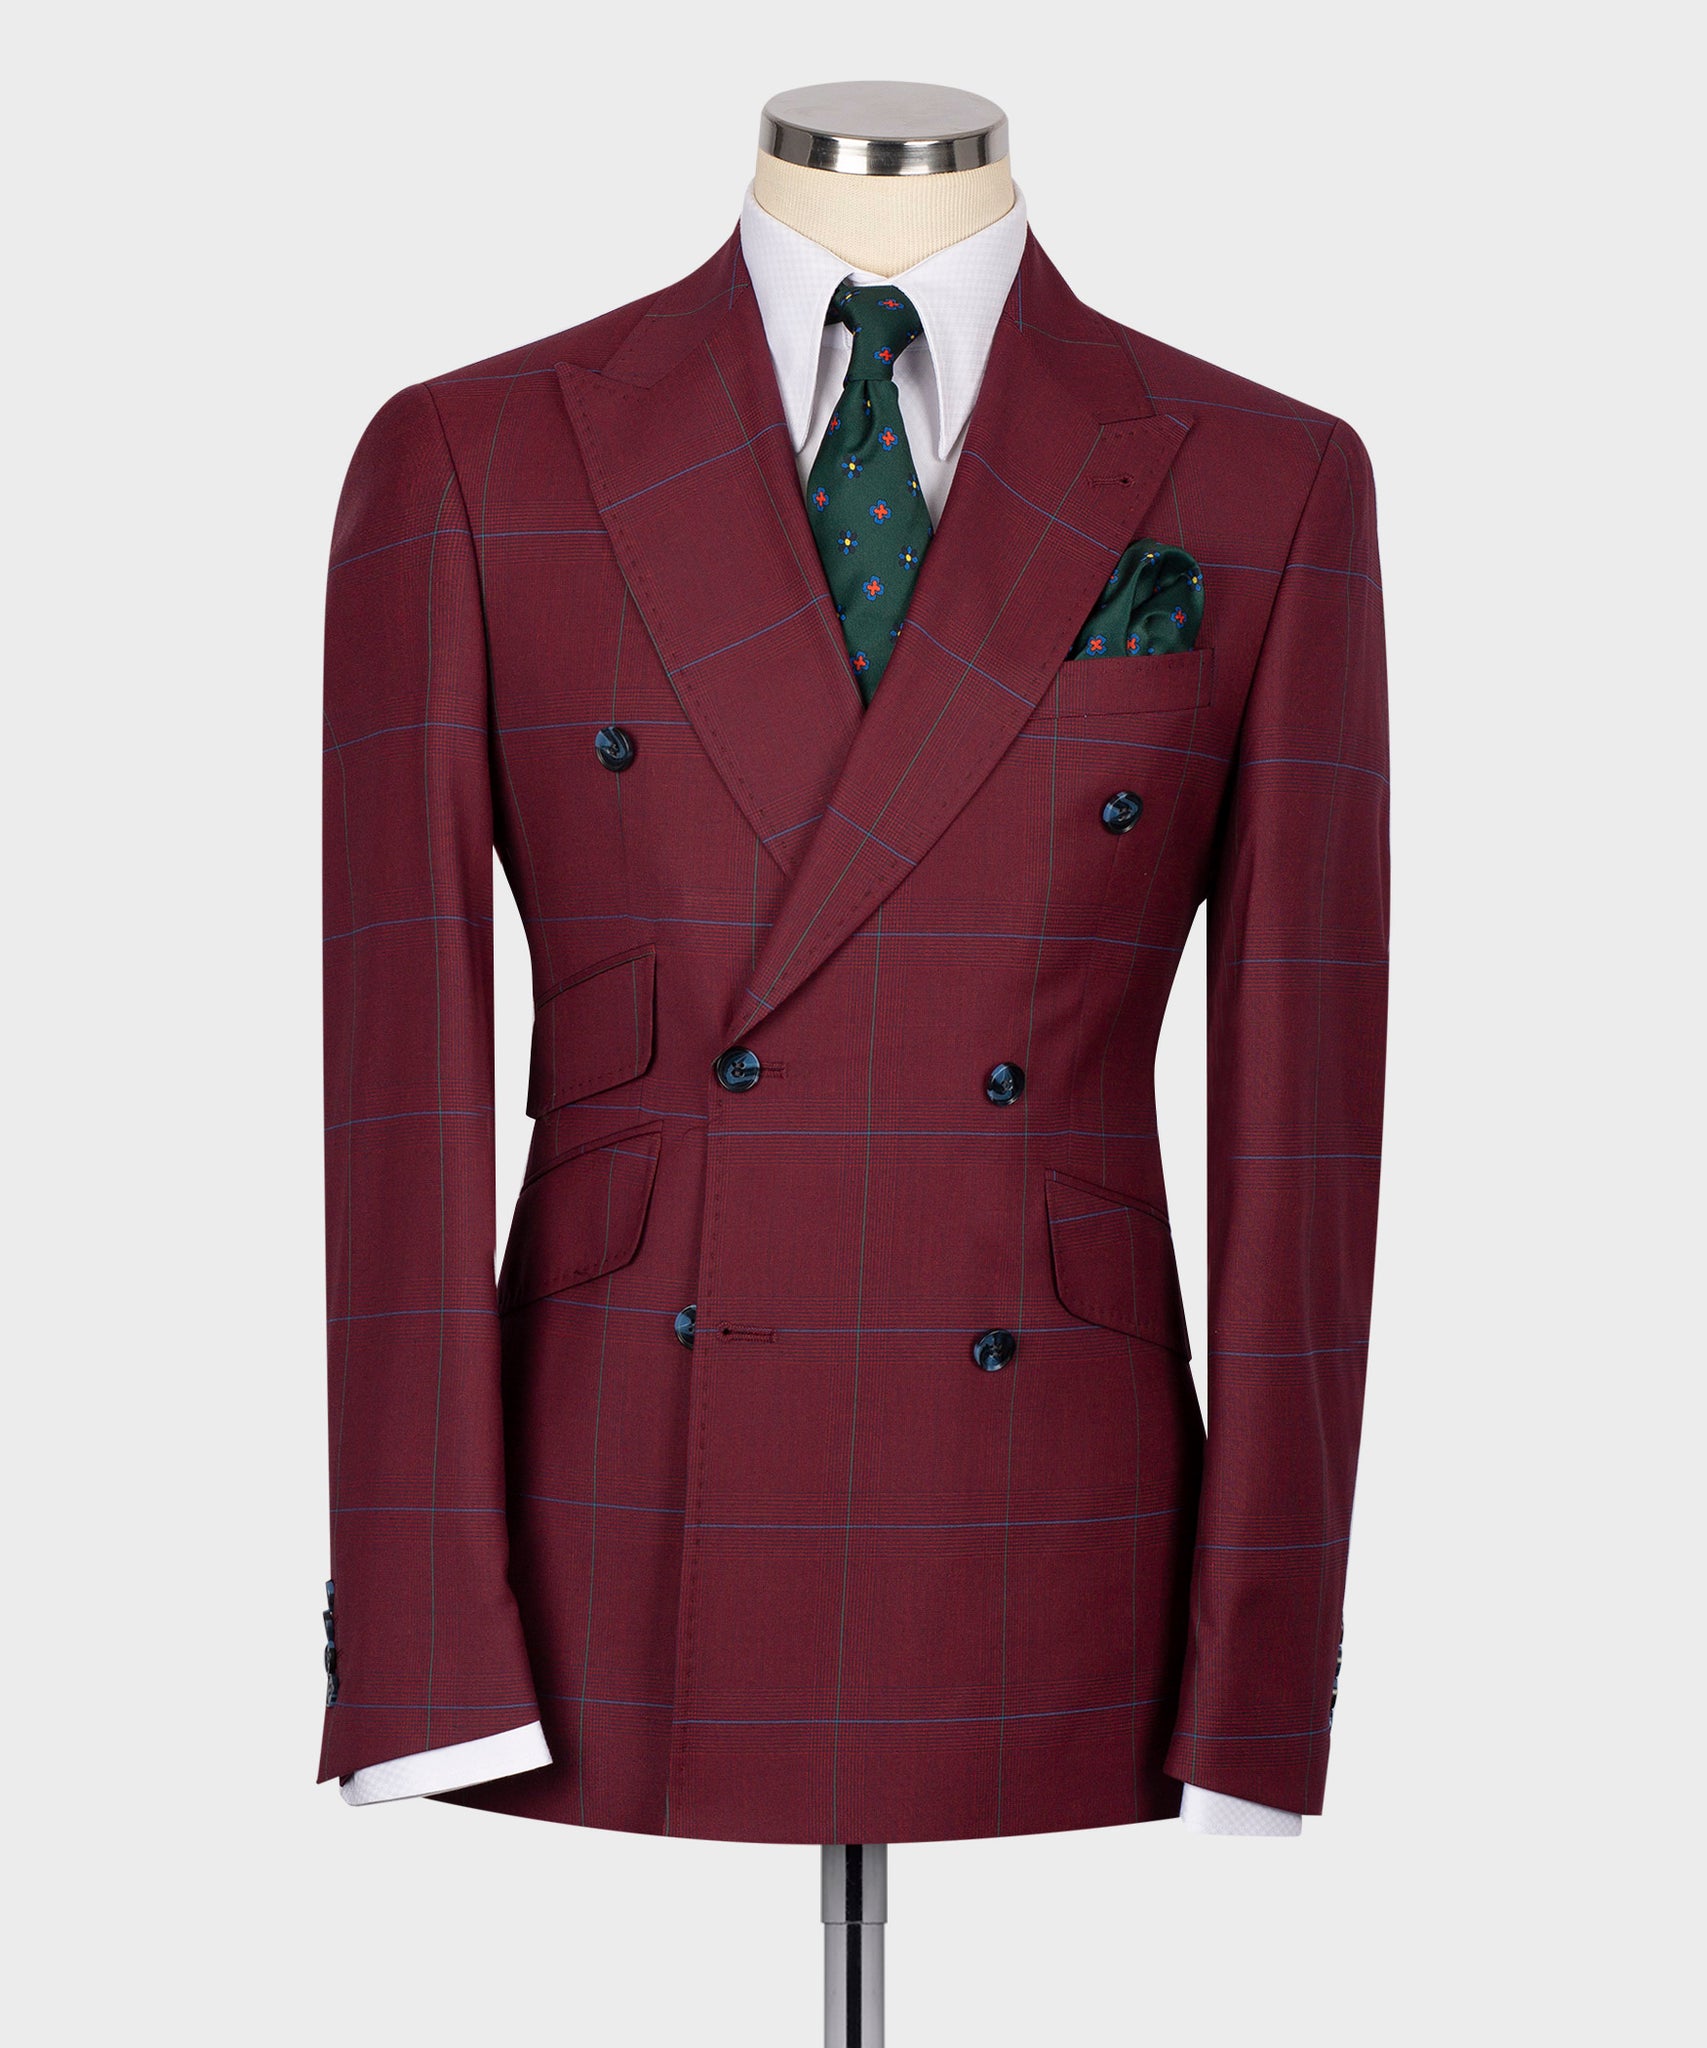 DOUBLE BREASTED BURGUNDY MEN'S SUIT